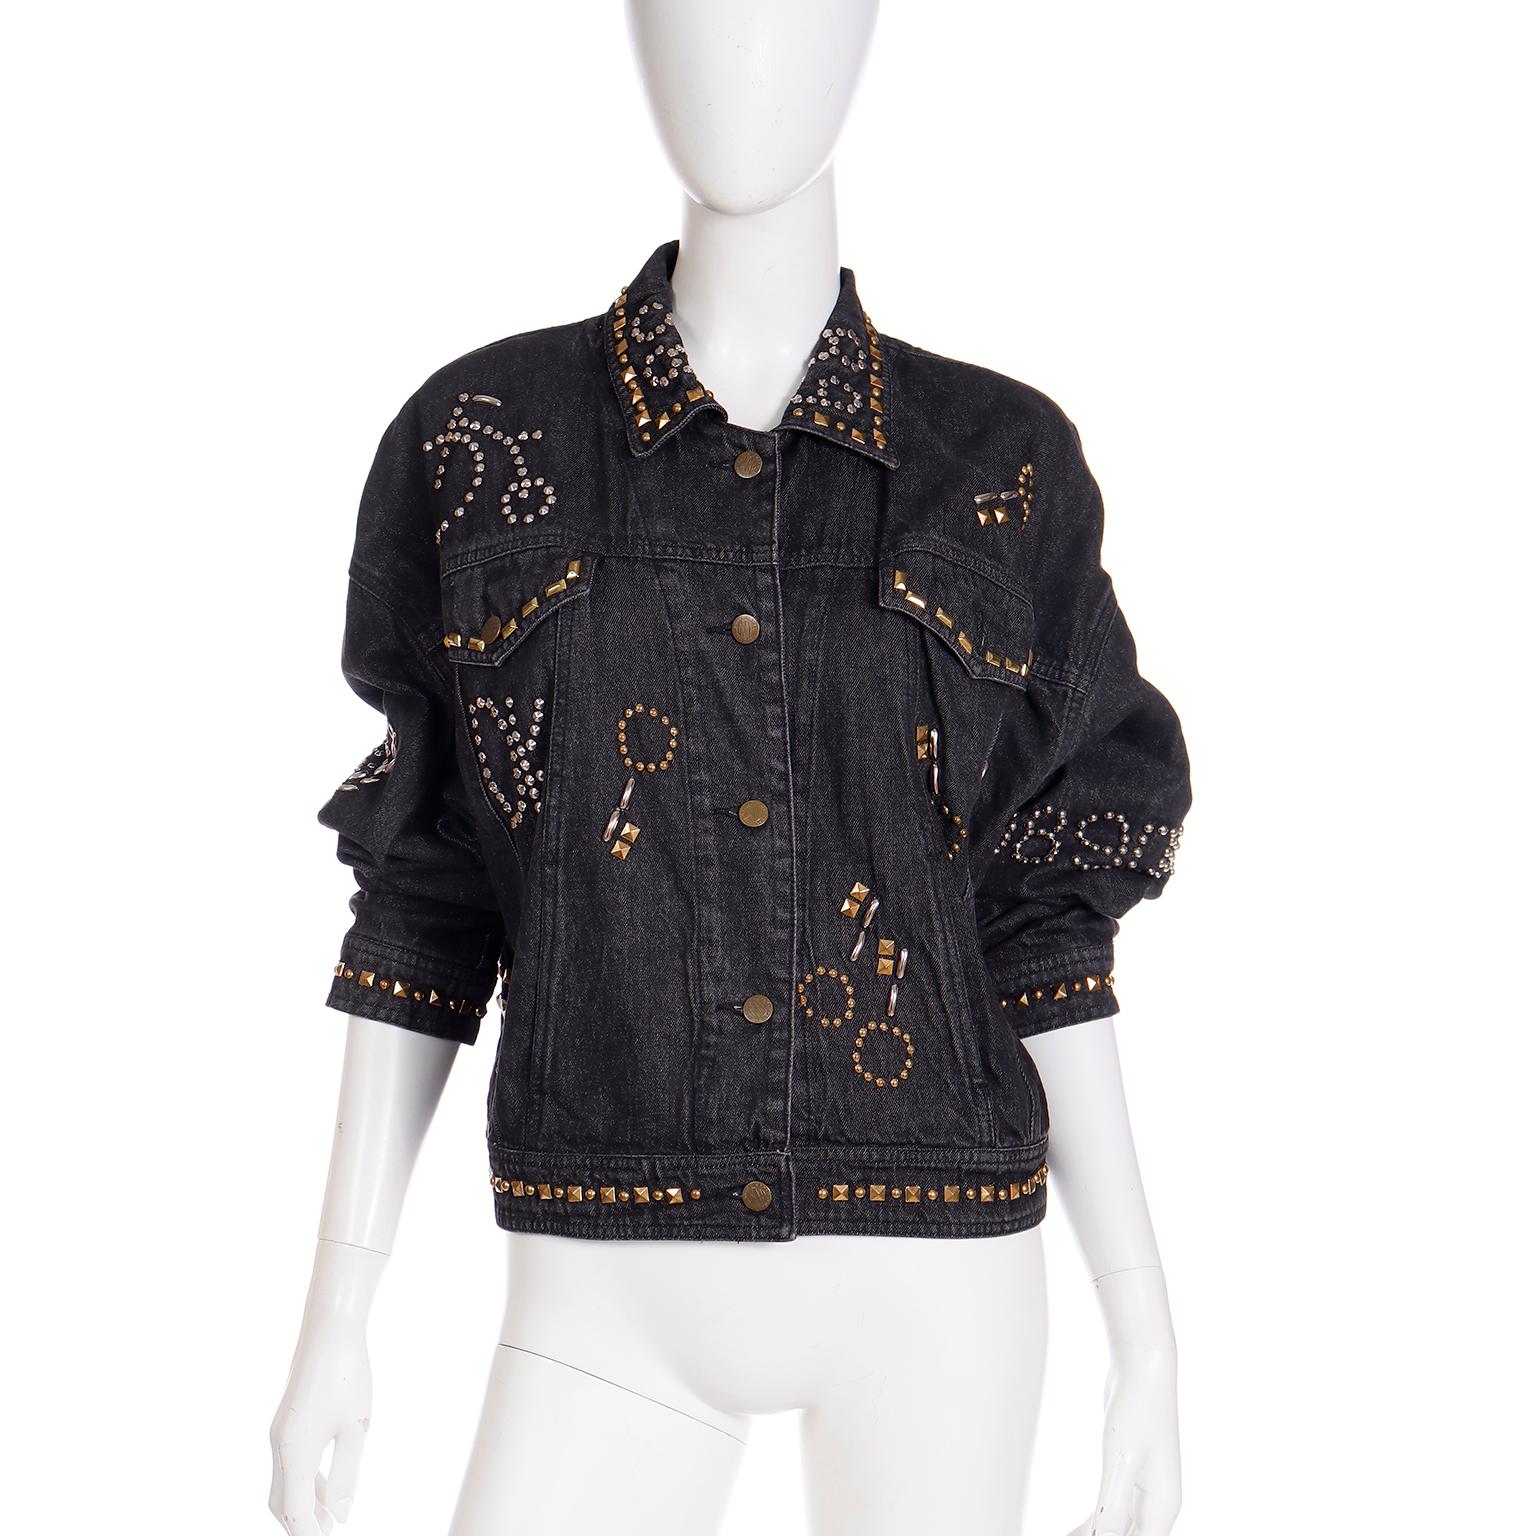 We sometimes run across very early DKNY pieces that are pretty spectacular, but this jacket has to be one of our favorites! This black washed denim jacket is embellished with gold and silver metal studs that form novelty shapes and words. Bicycles,